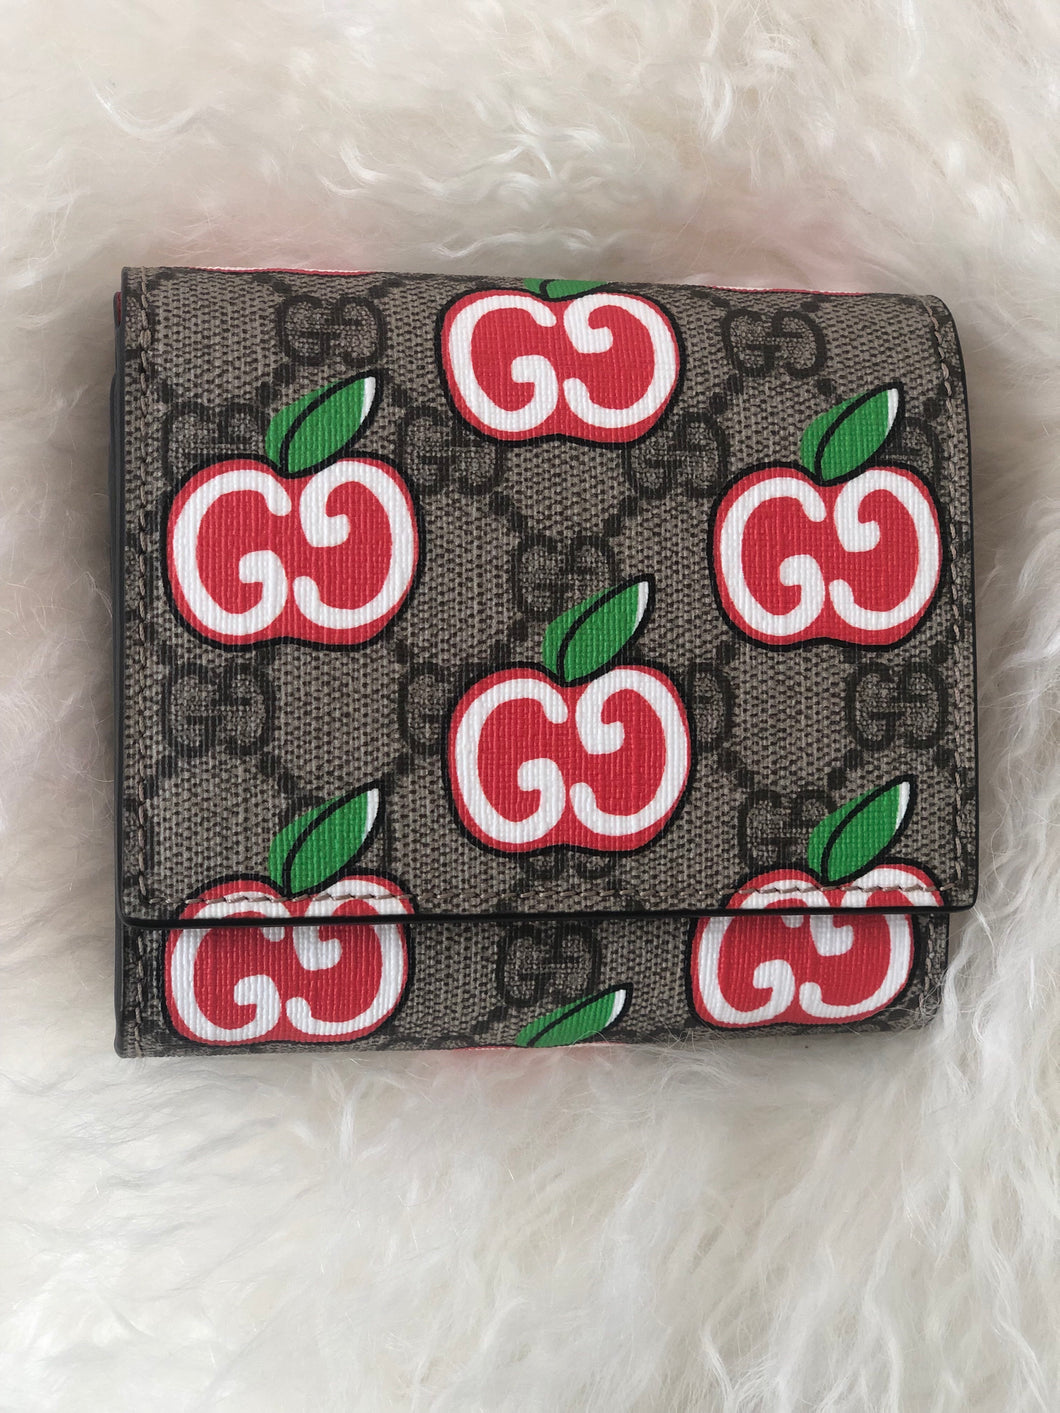 Gucci GG Supreme Cherry Wallet at the best price